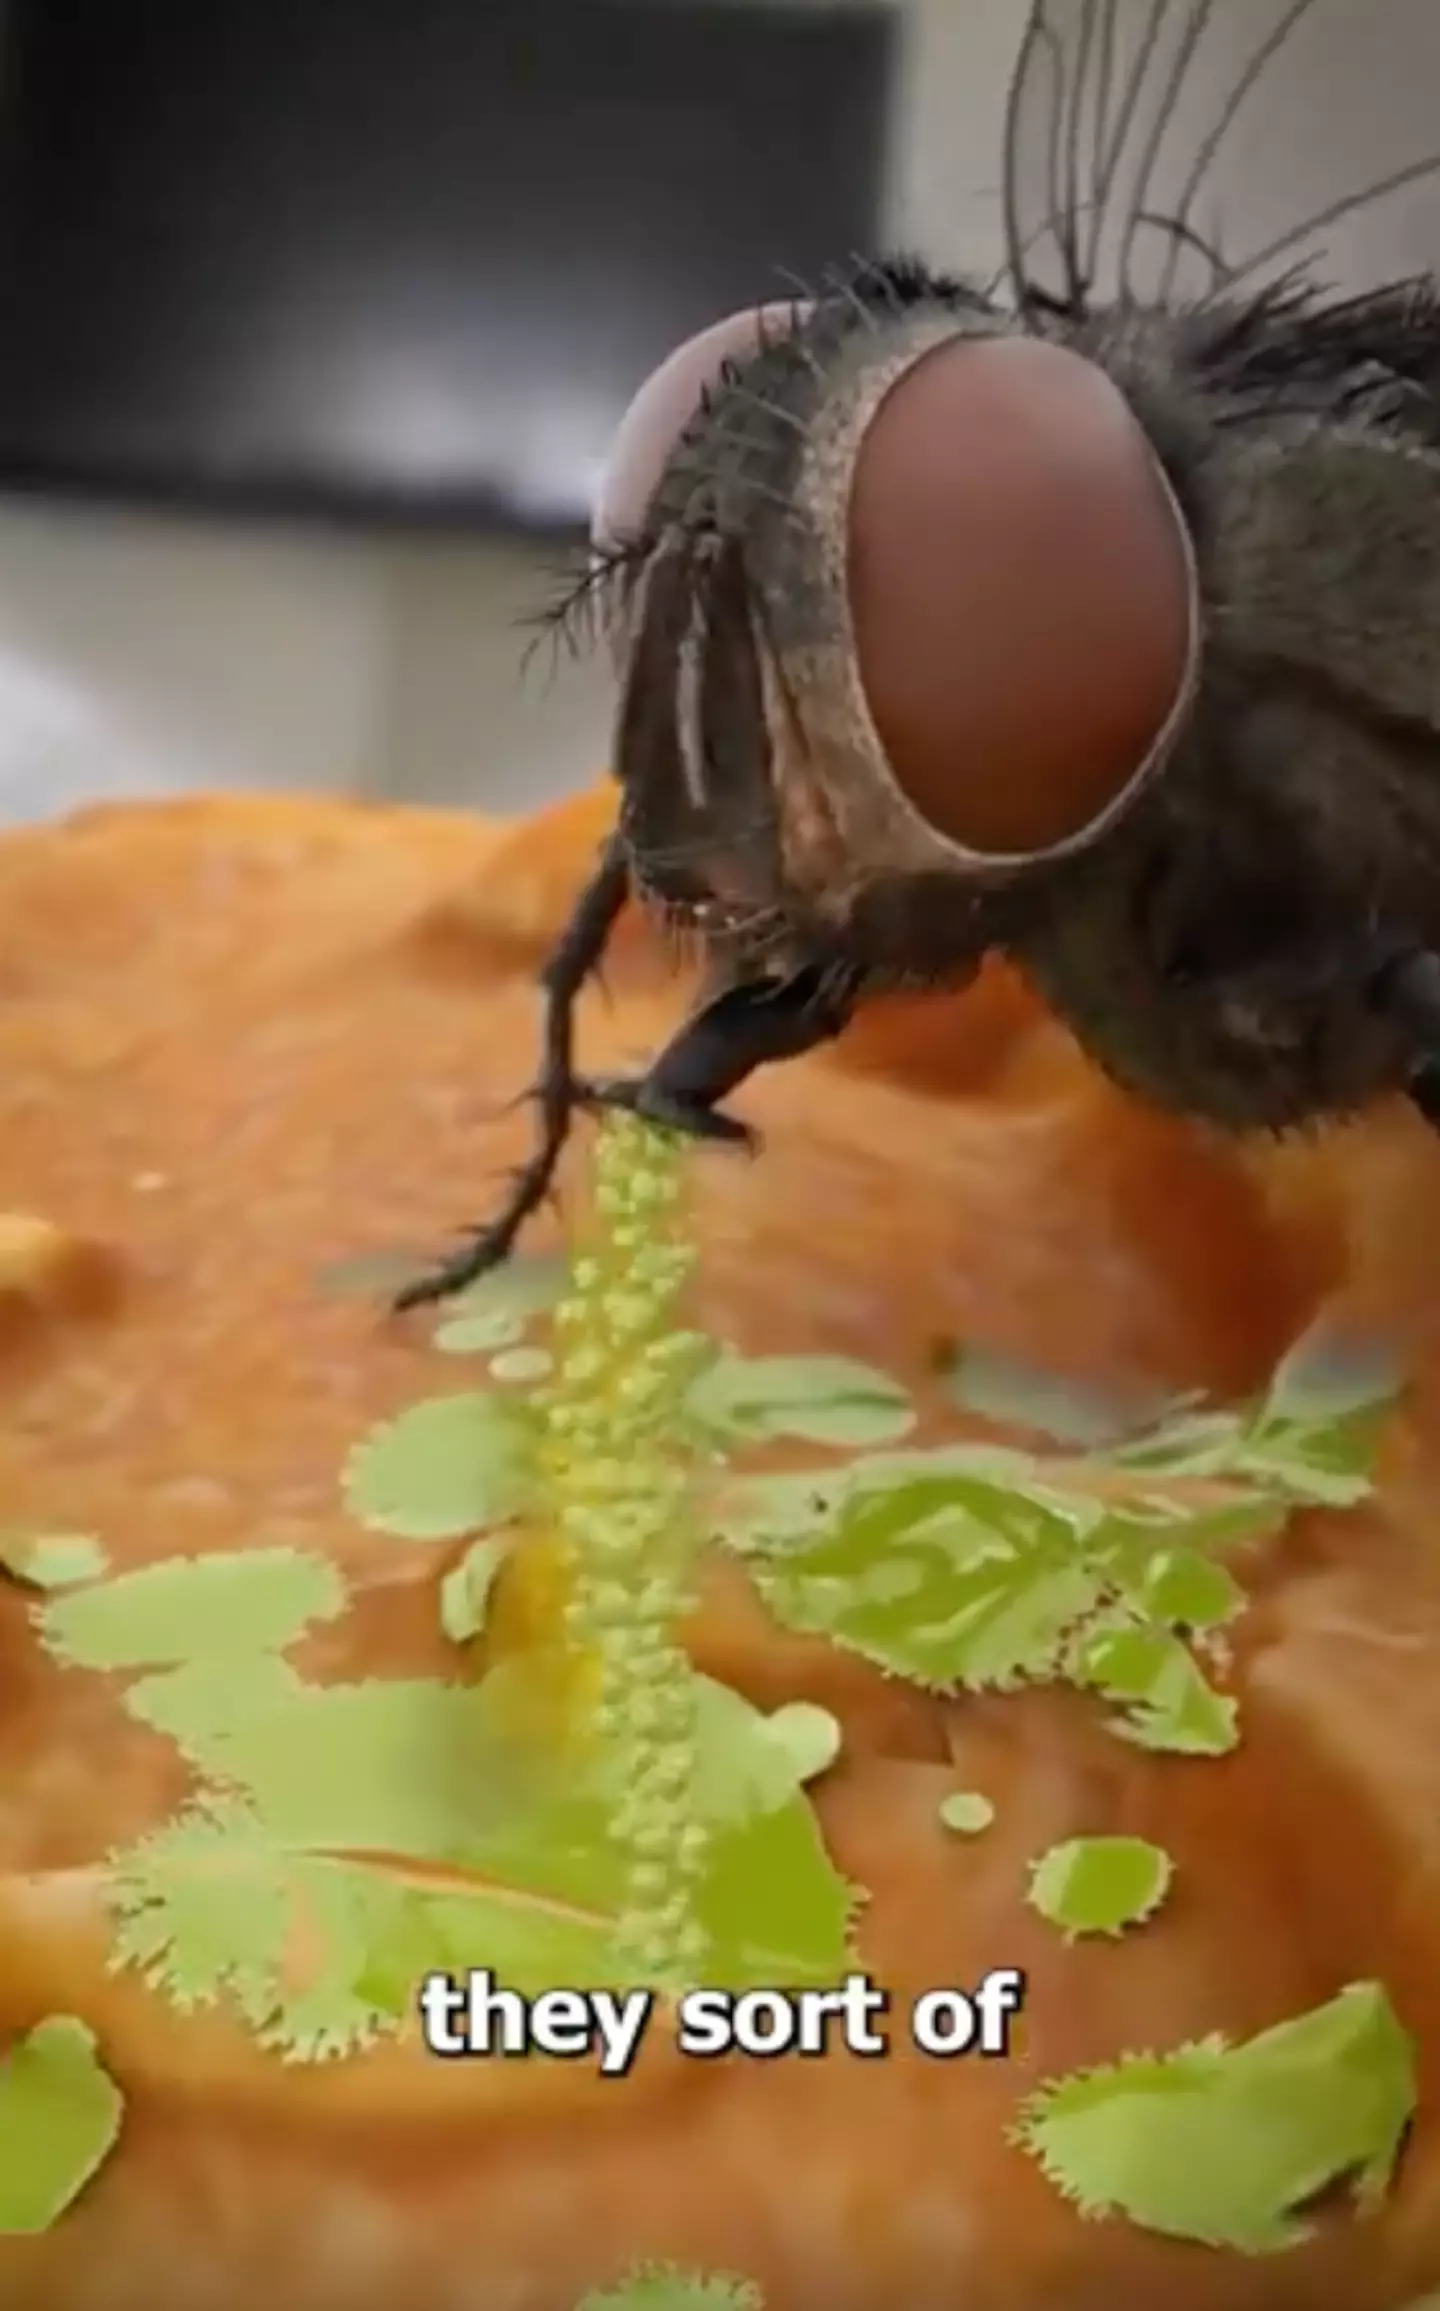 People have been left grossed out after finding out how a fly eats.